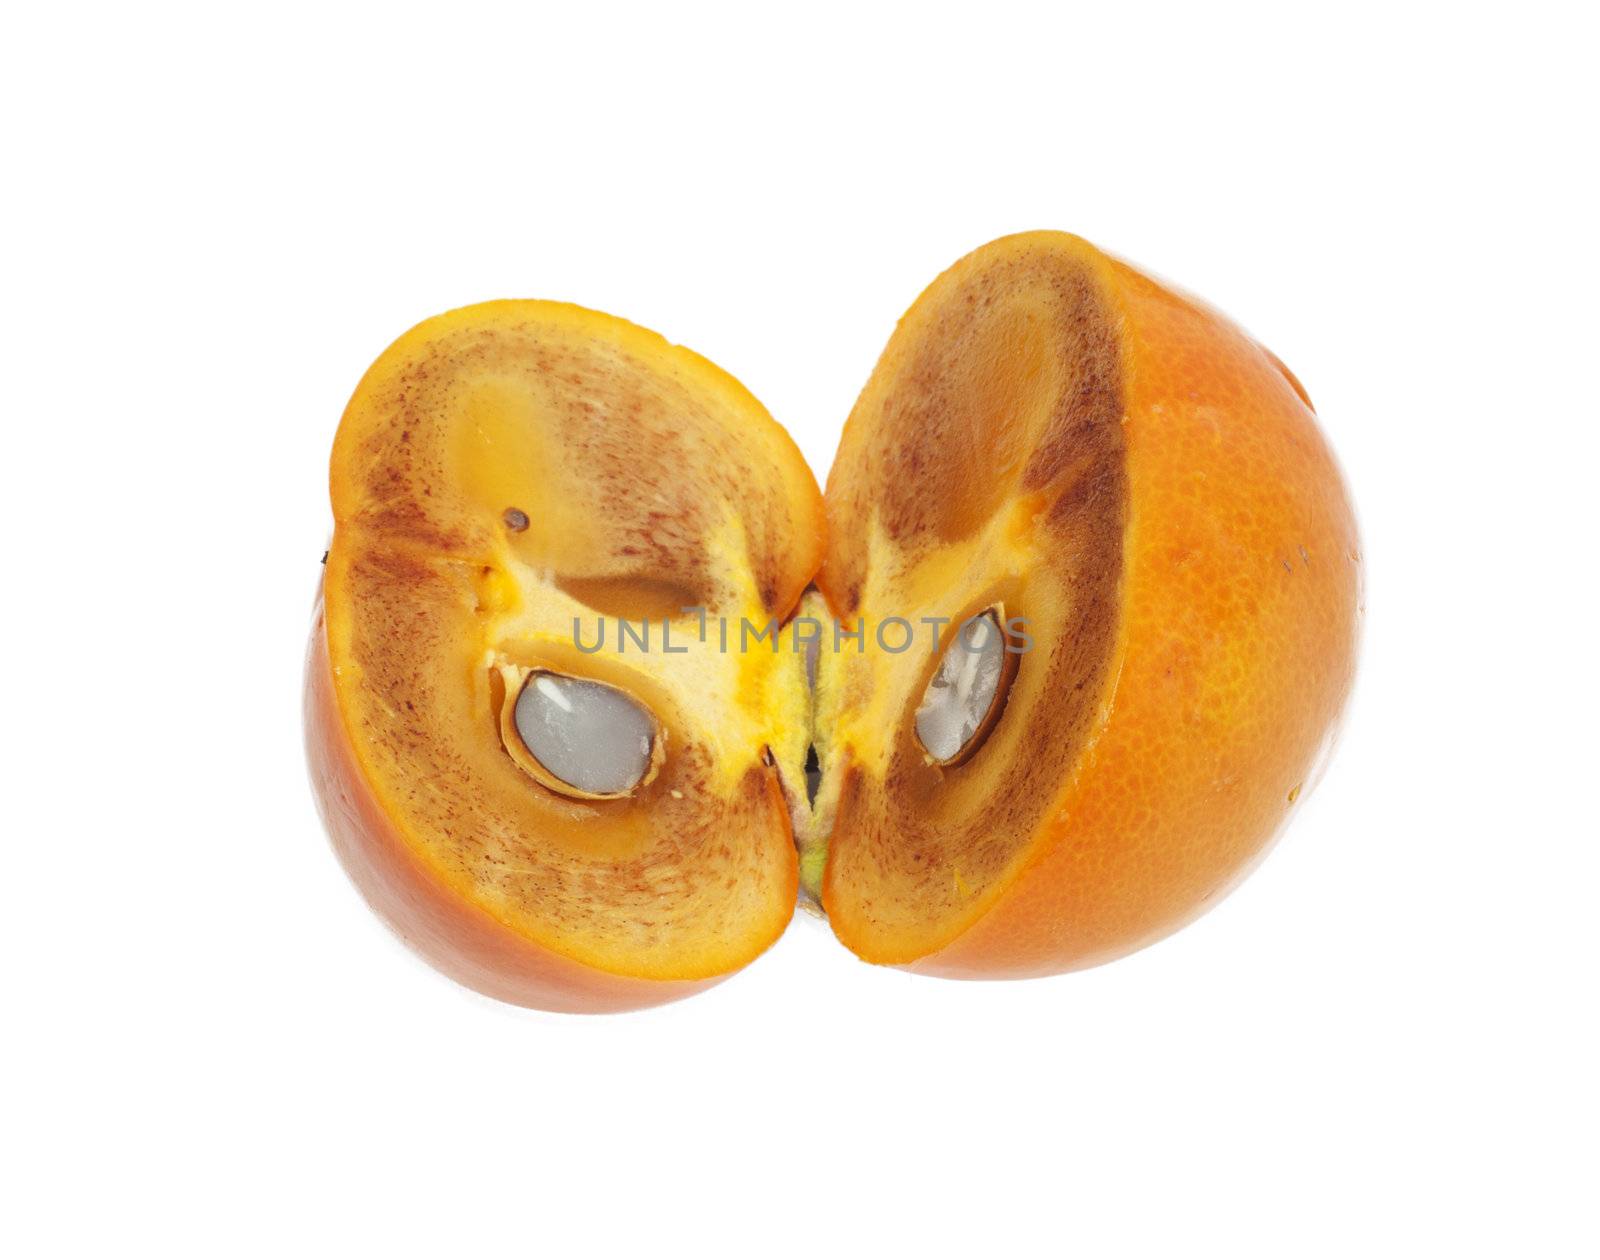 Two ripe halves of a persimmon